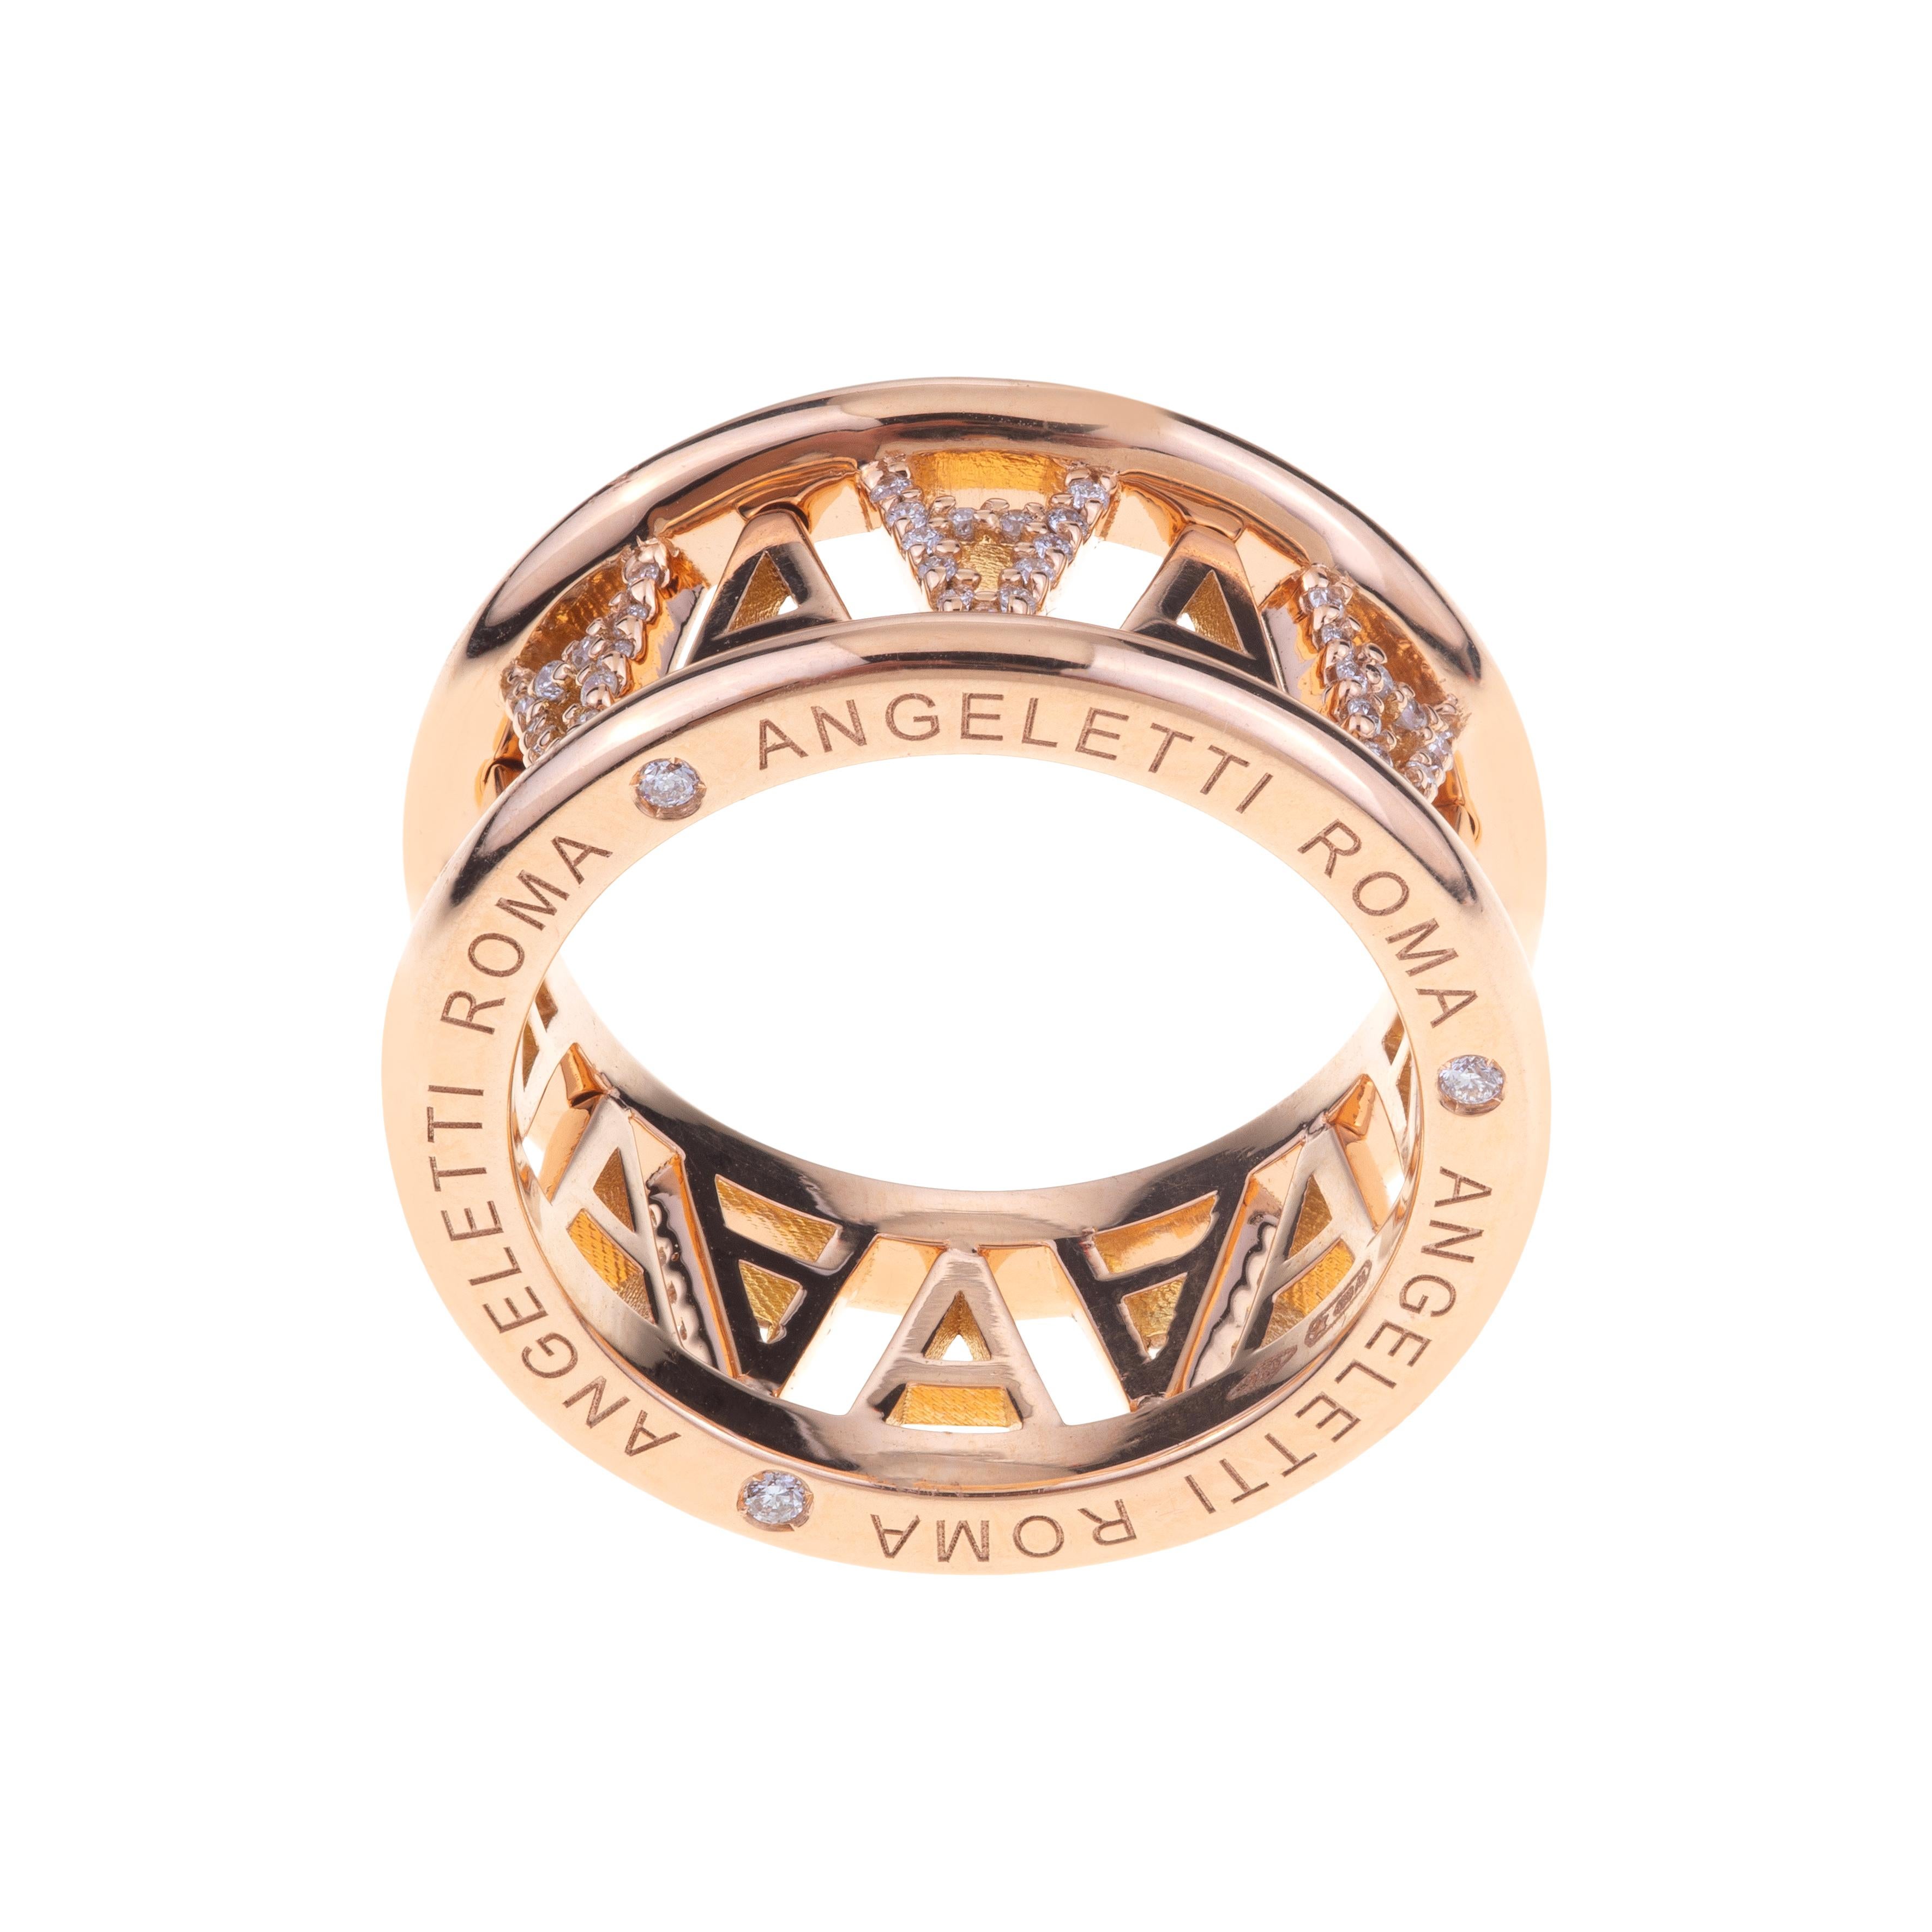 Women's Logo by Angeletti. Rose Gold Ring with alternate 